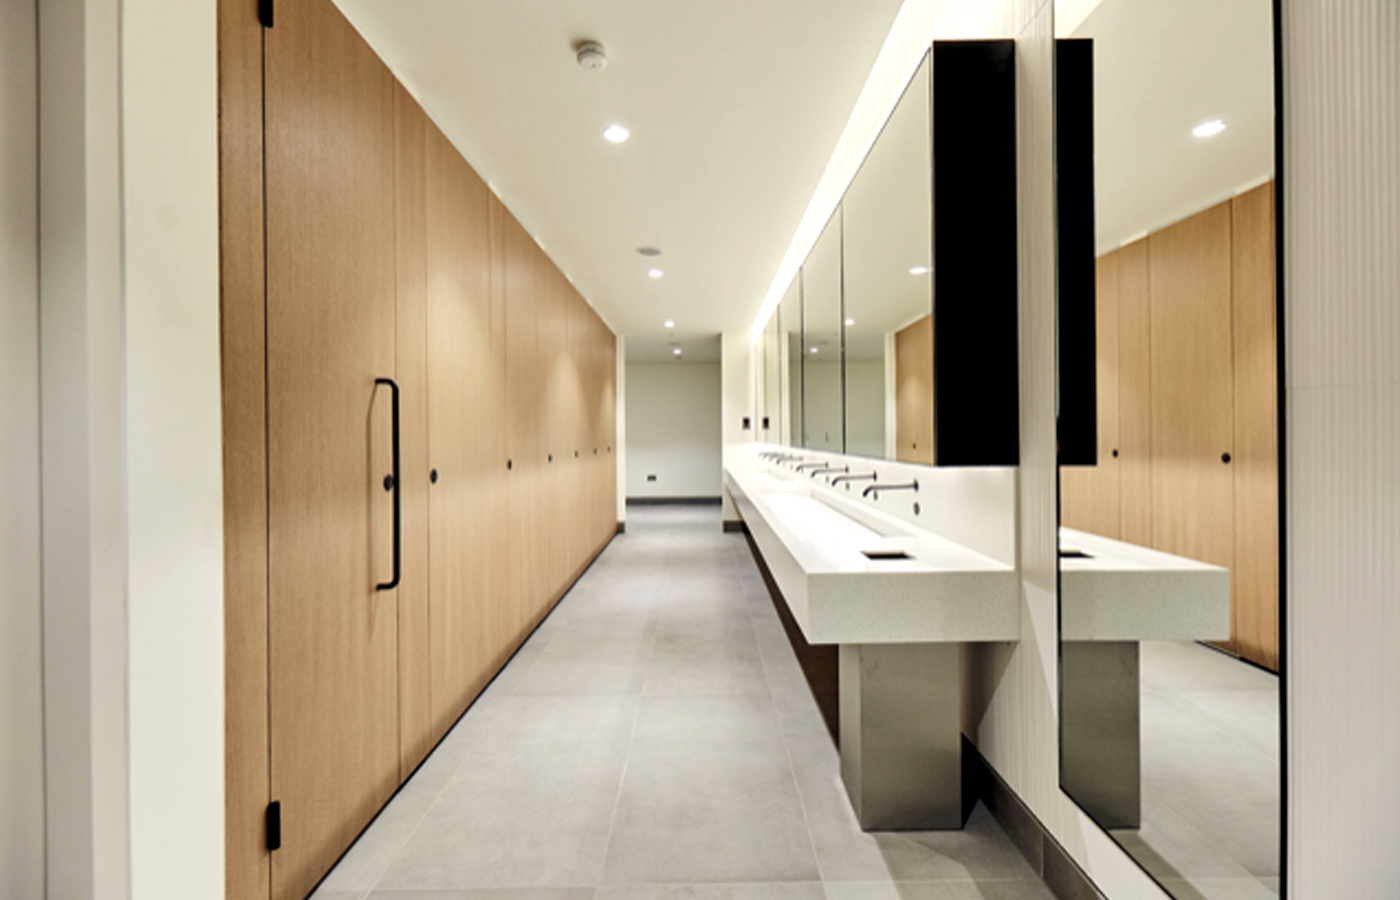 Wc fitouts design and coordination